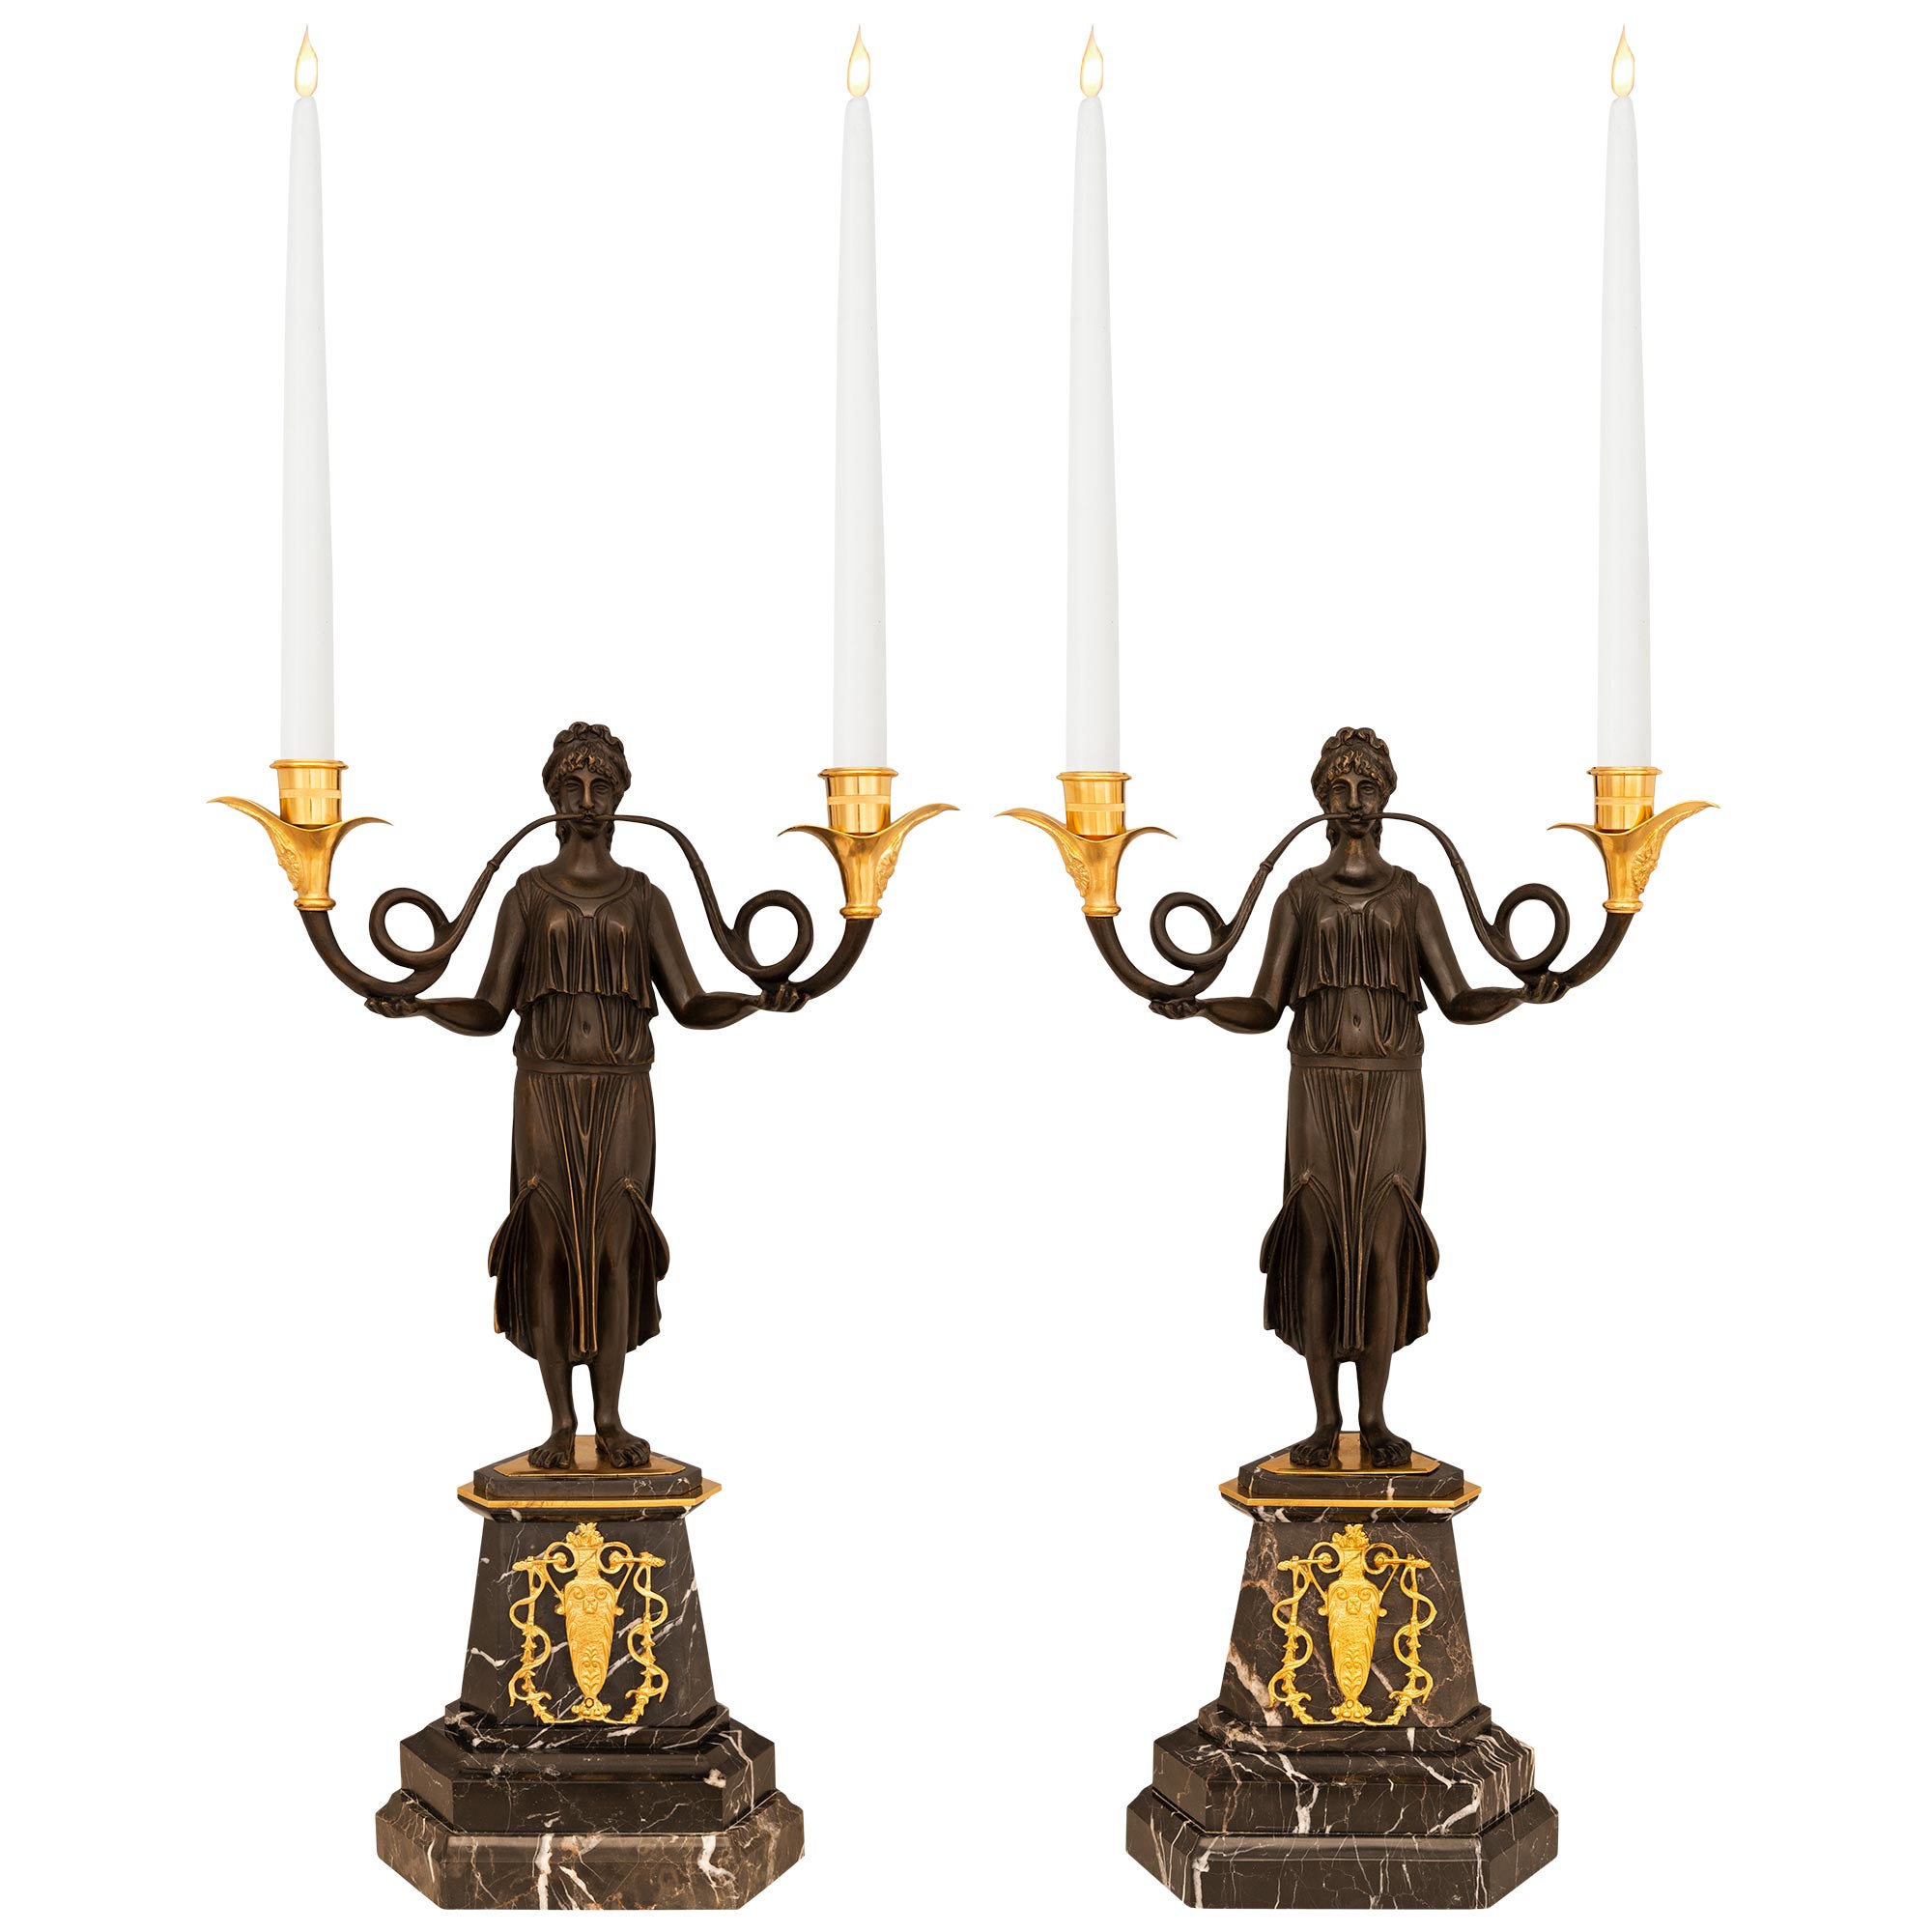 Pair Of French 19th Century Neoclassical St. Bronze, Ormolu & Marble Candelabras For Sale